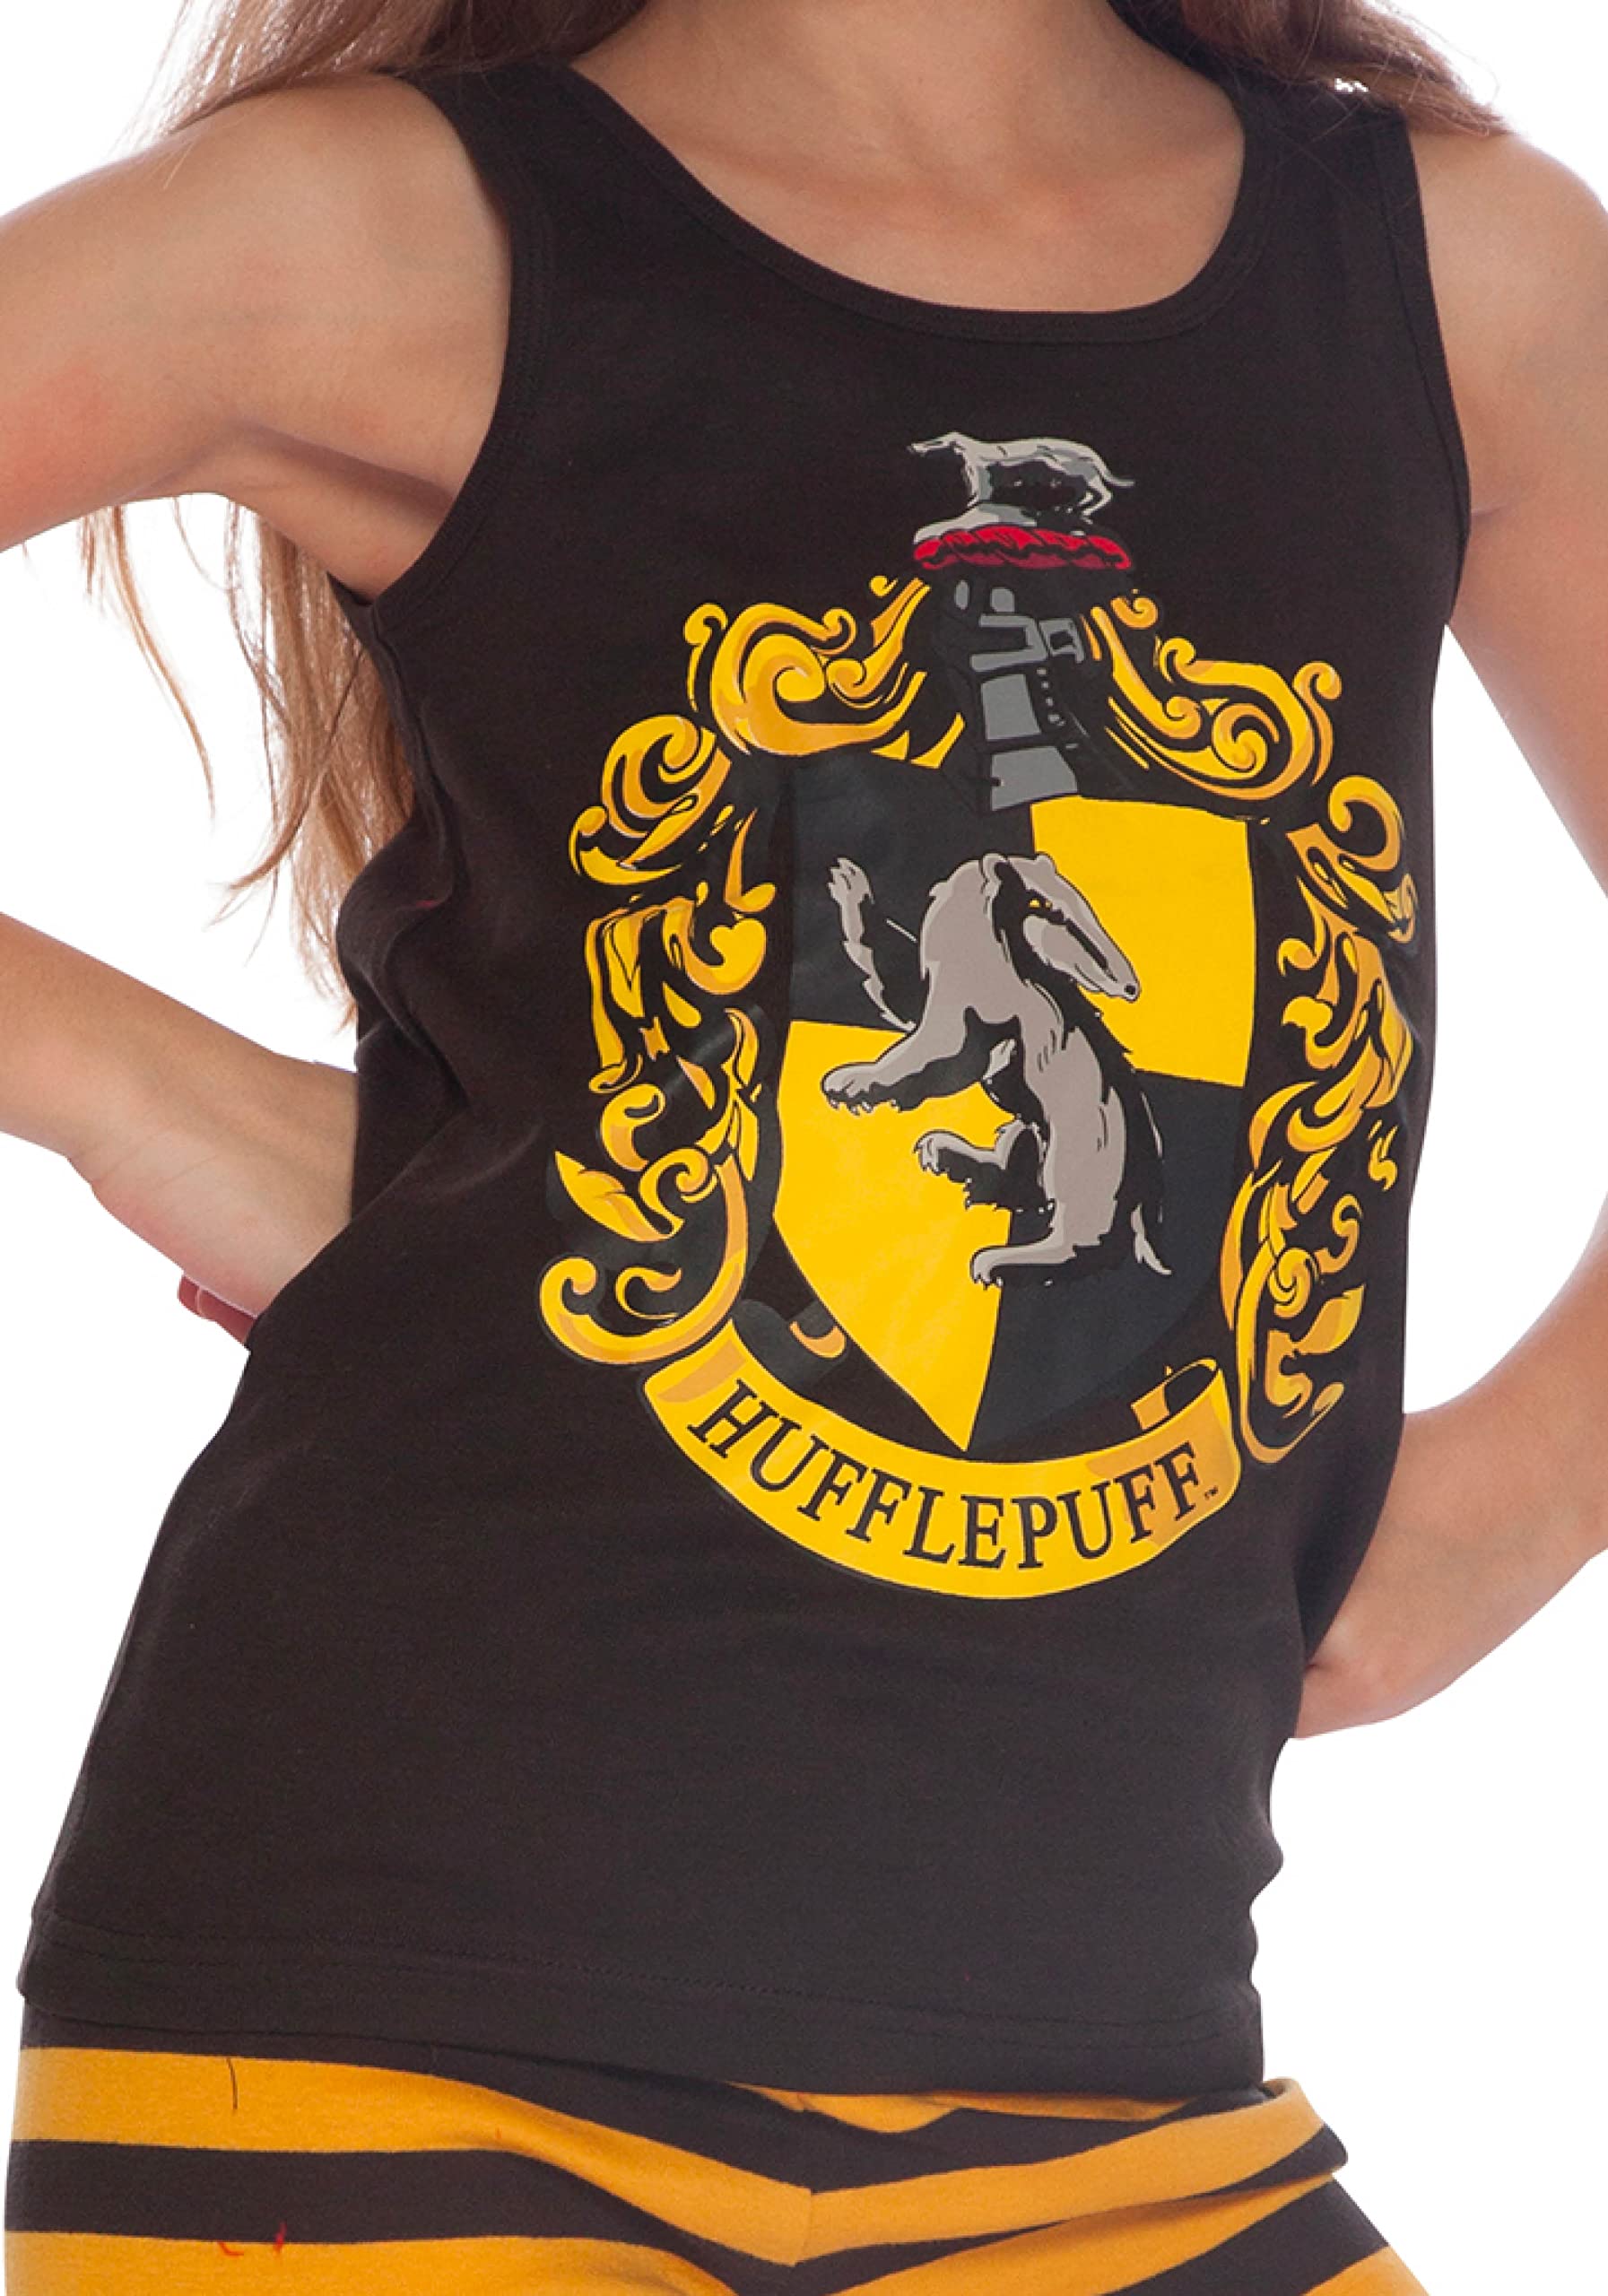 Harry Potter Girls Gryffindor House Crest Tank Top and Short Pajama 2pc Set